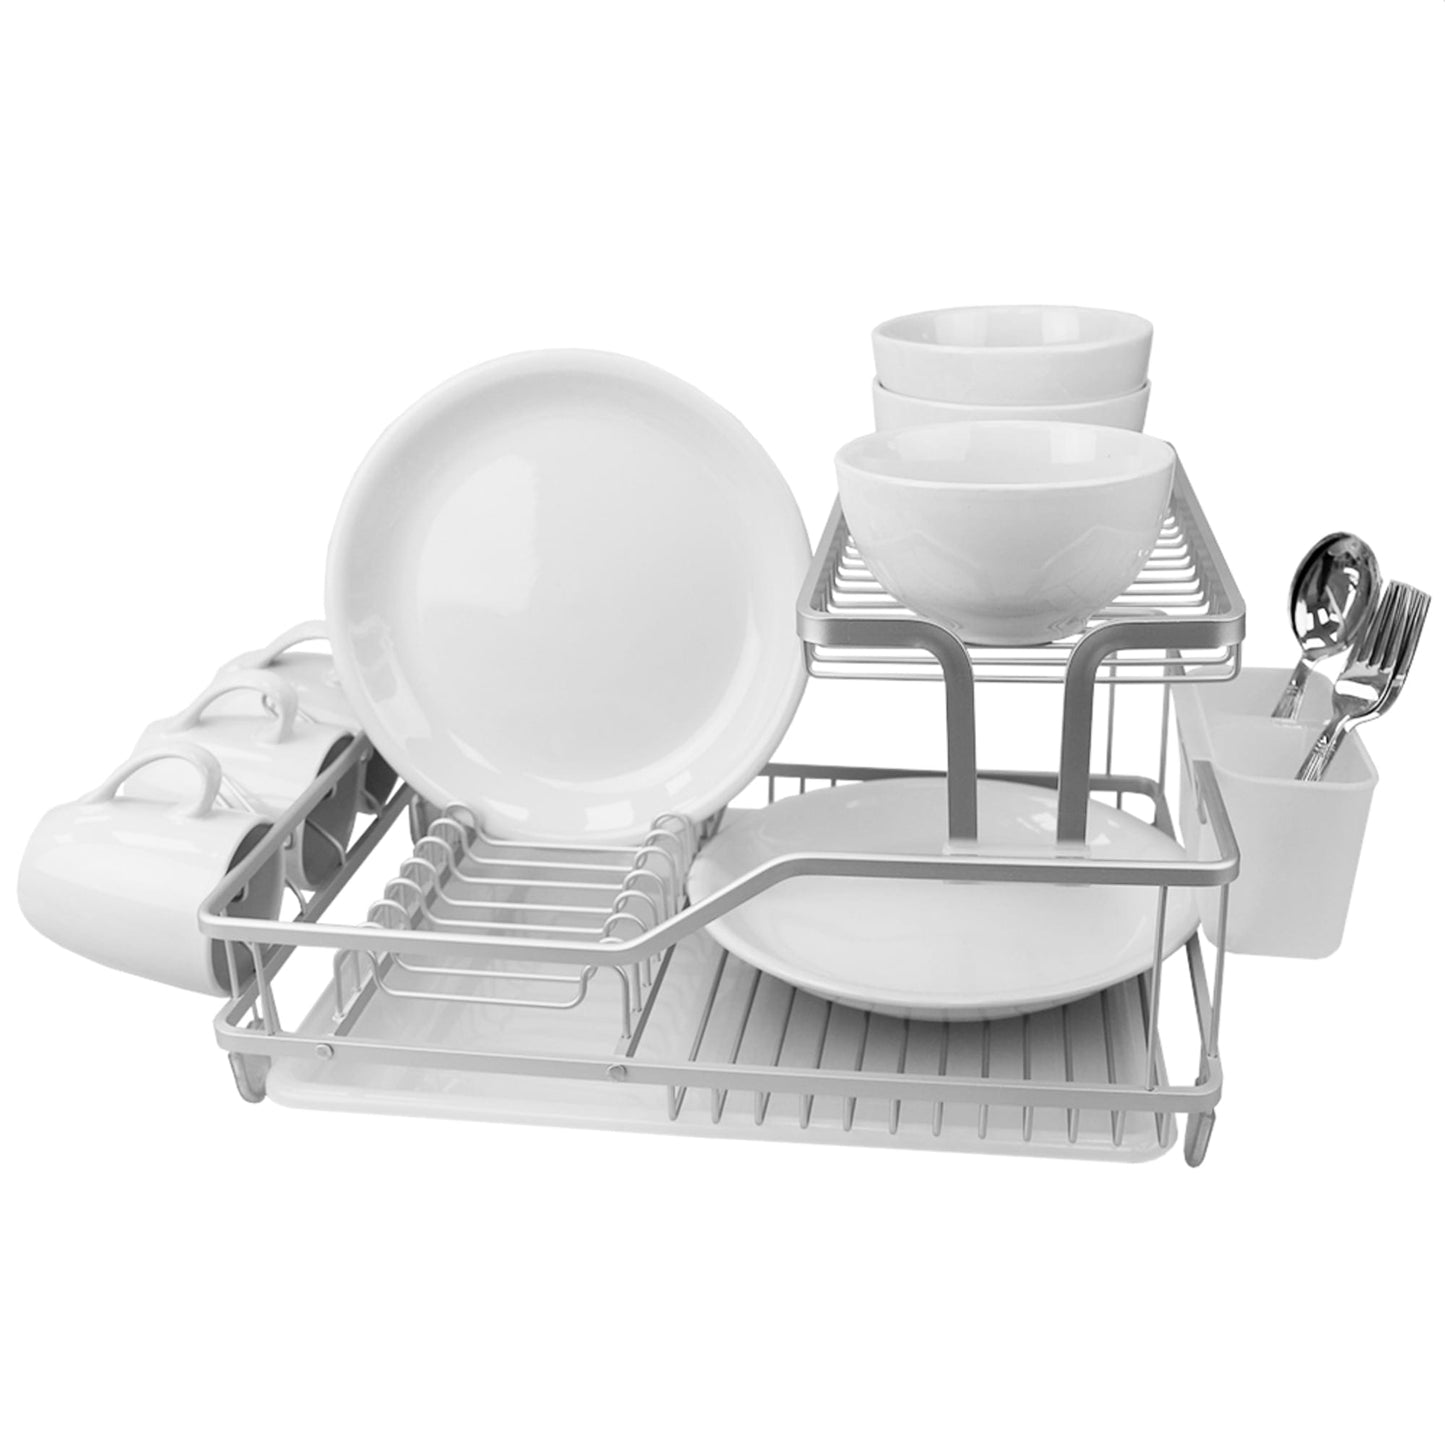 Michael Graves Elevated 2 Tier  Aluminum Dish Rack with Anti-Skid Feet and Removable Utensil Holder, Grey